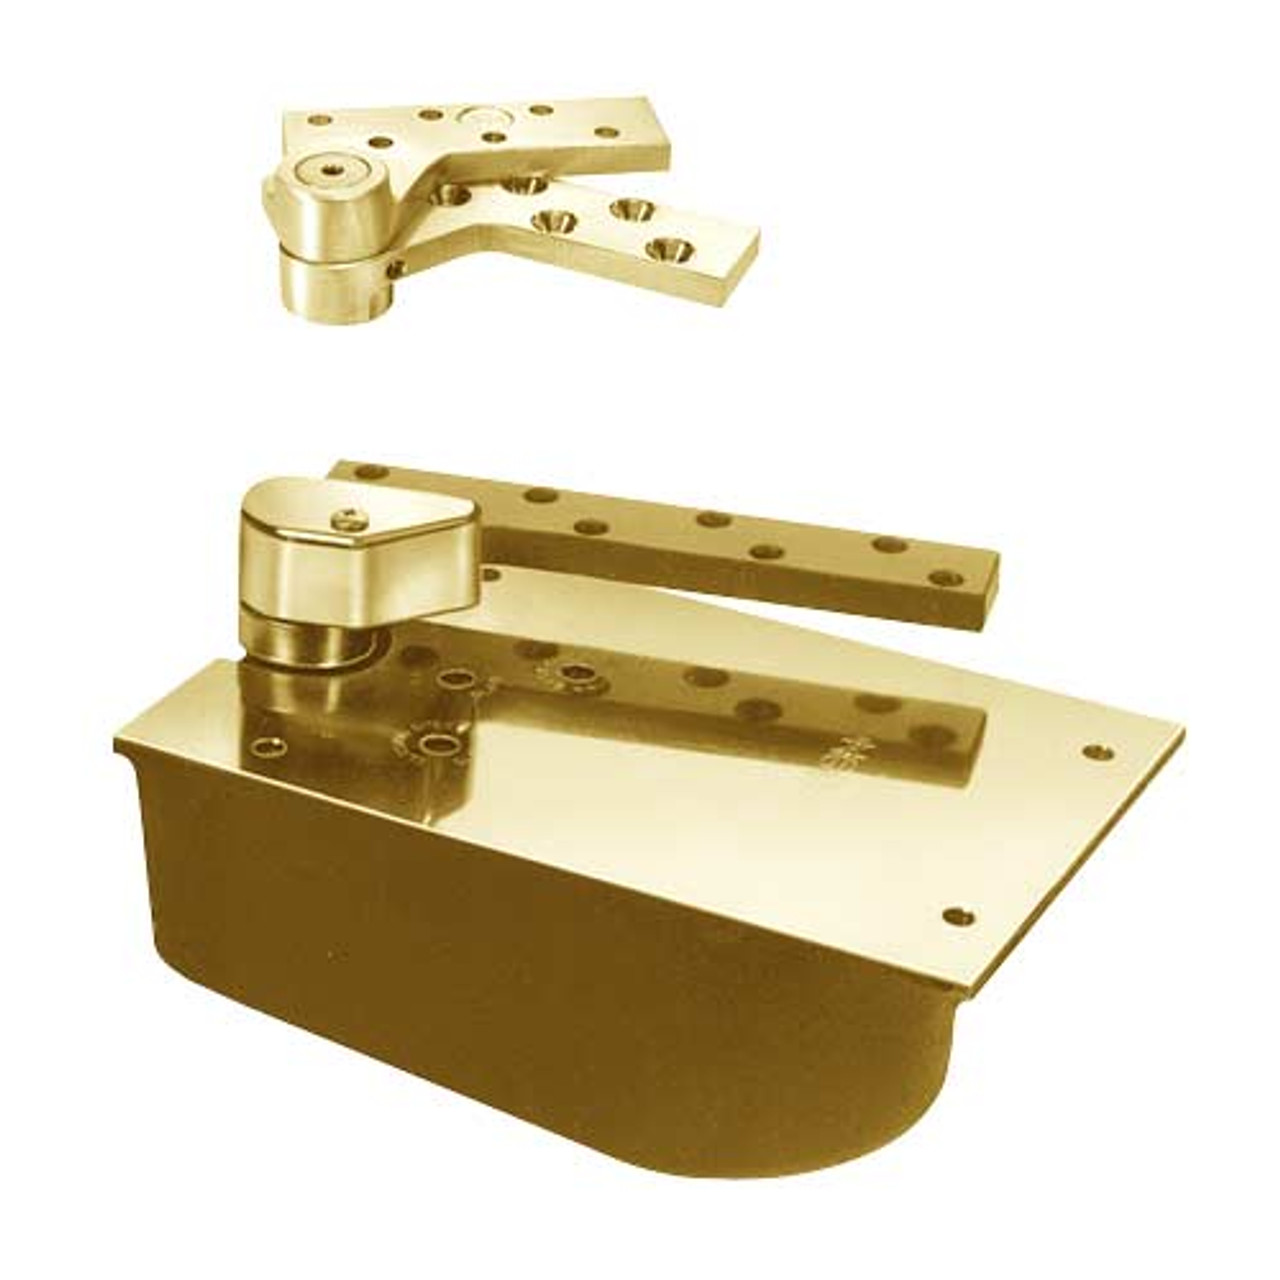 L27-95S-LTP-RH-2-1/4-605 Rixson 27 Series Extra Heavy Duty Lead Lined Offset Floor Closer in Bright Brass Finish